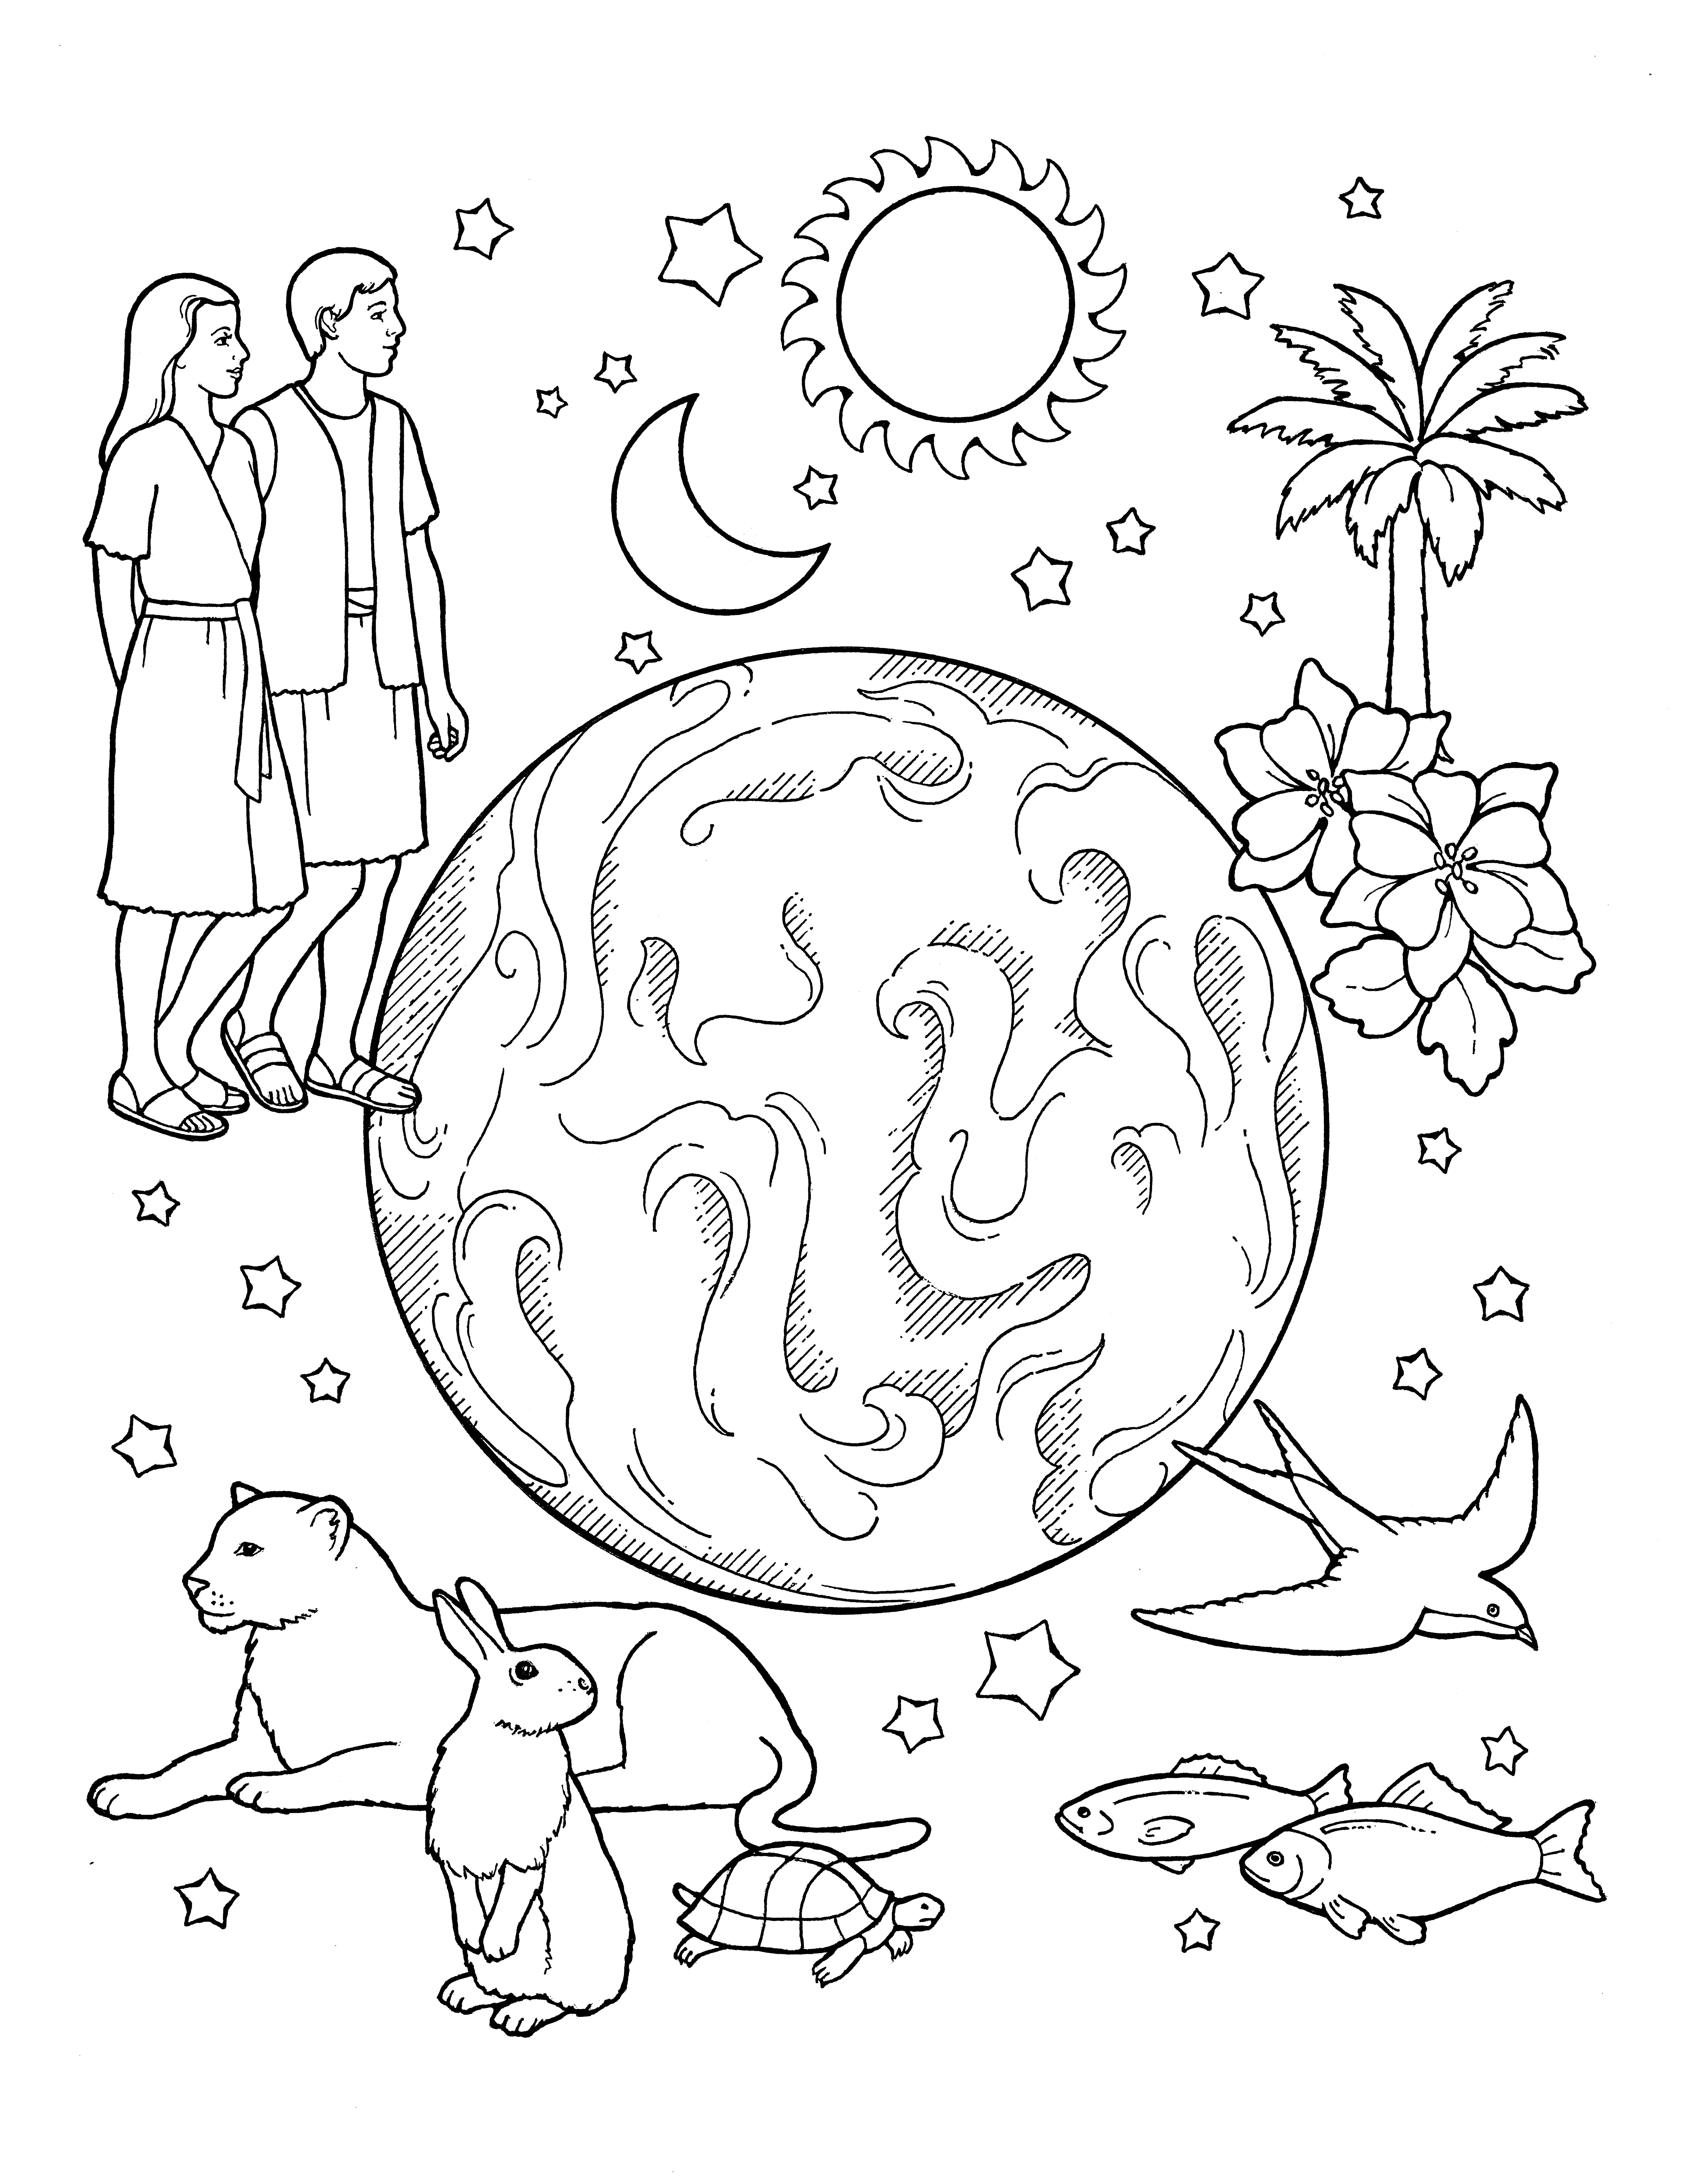 An illustration of the Creation, with the earth in the center surrounded by the sun, moon, stars, Adam and Eve, animals, fish, a palm tree, and flowers.